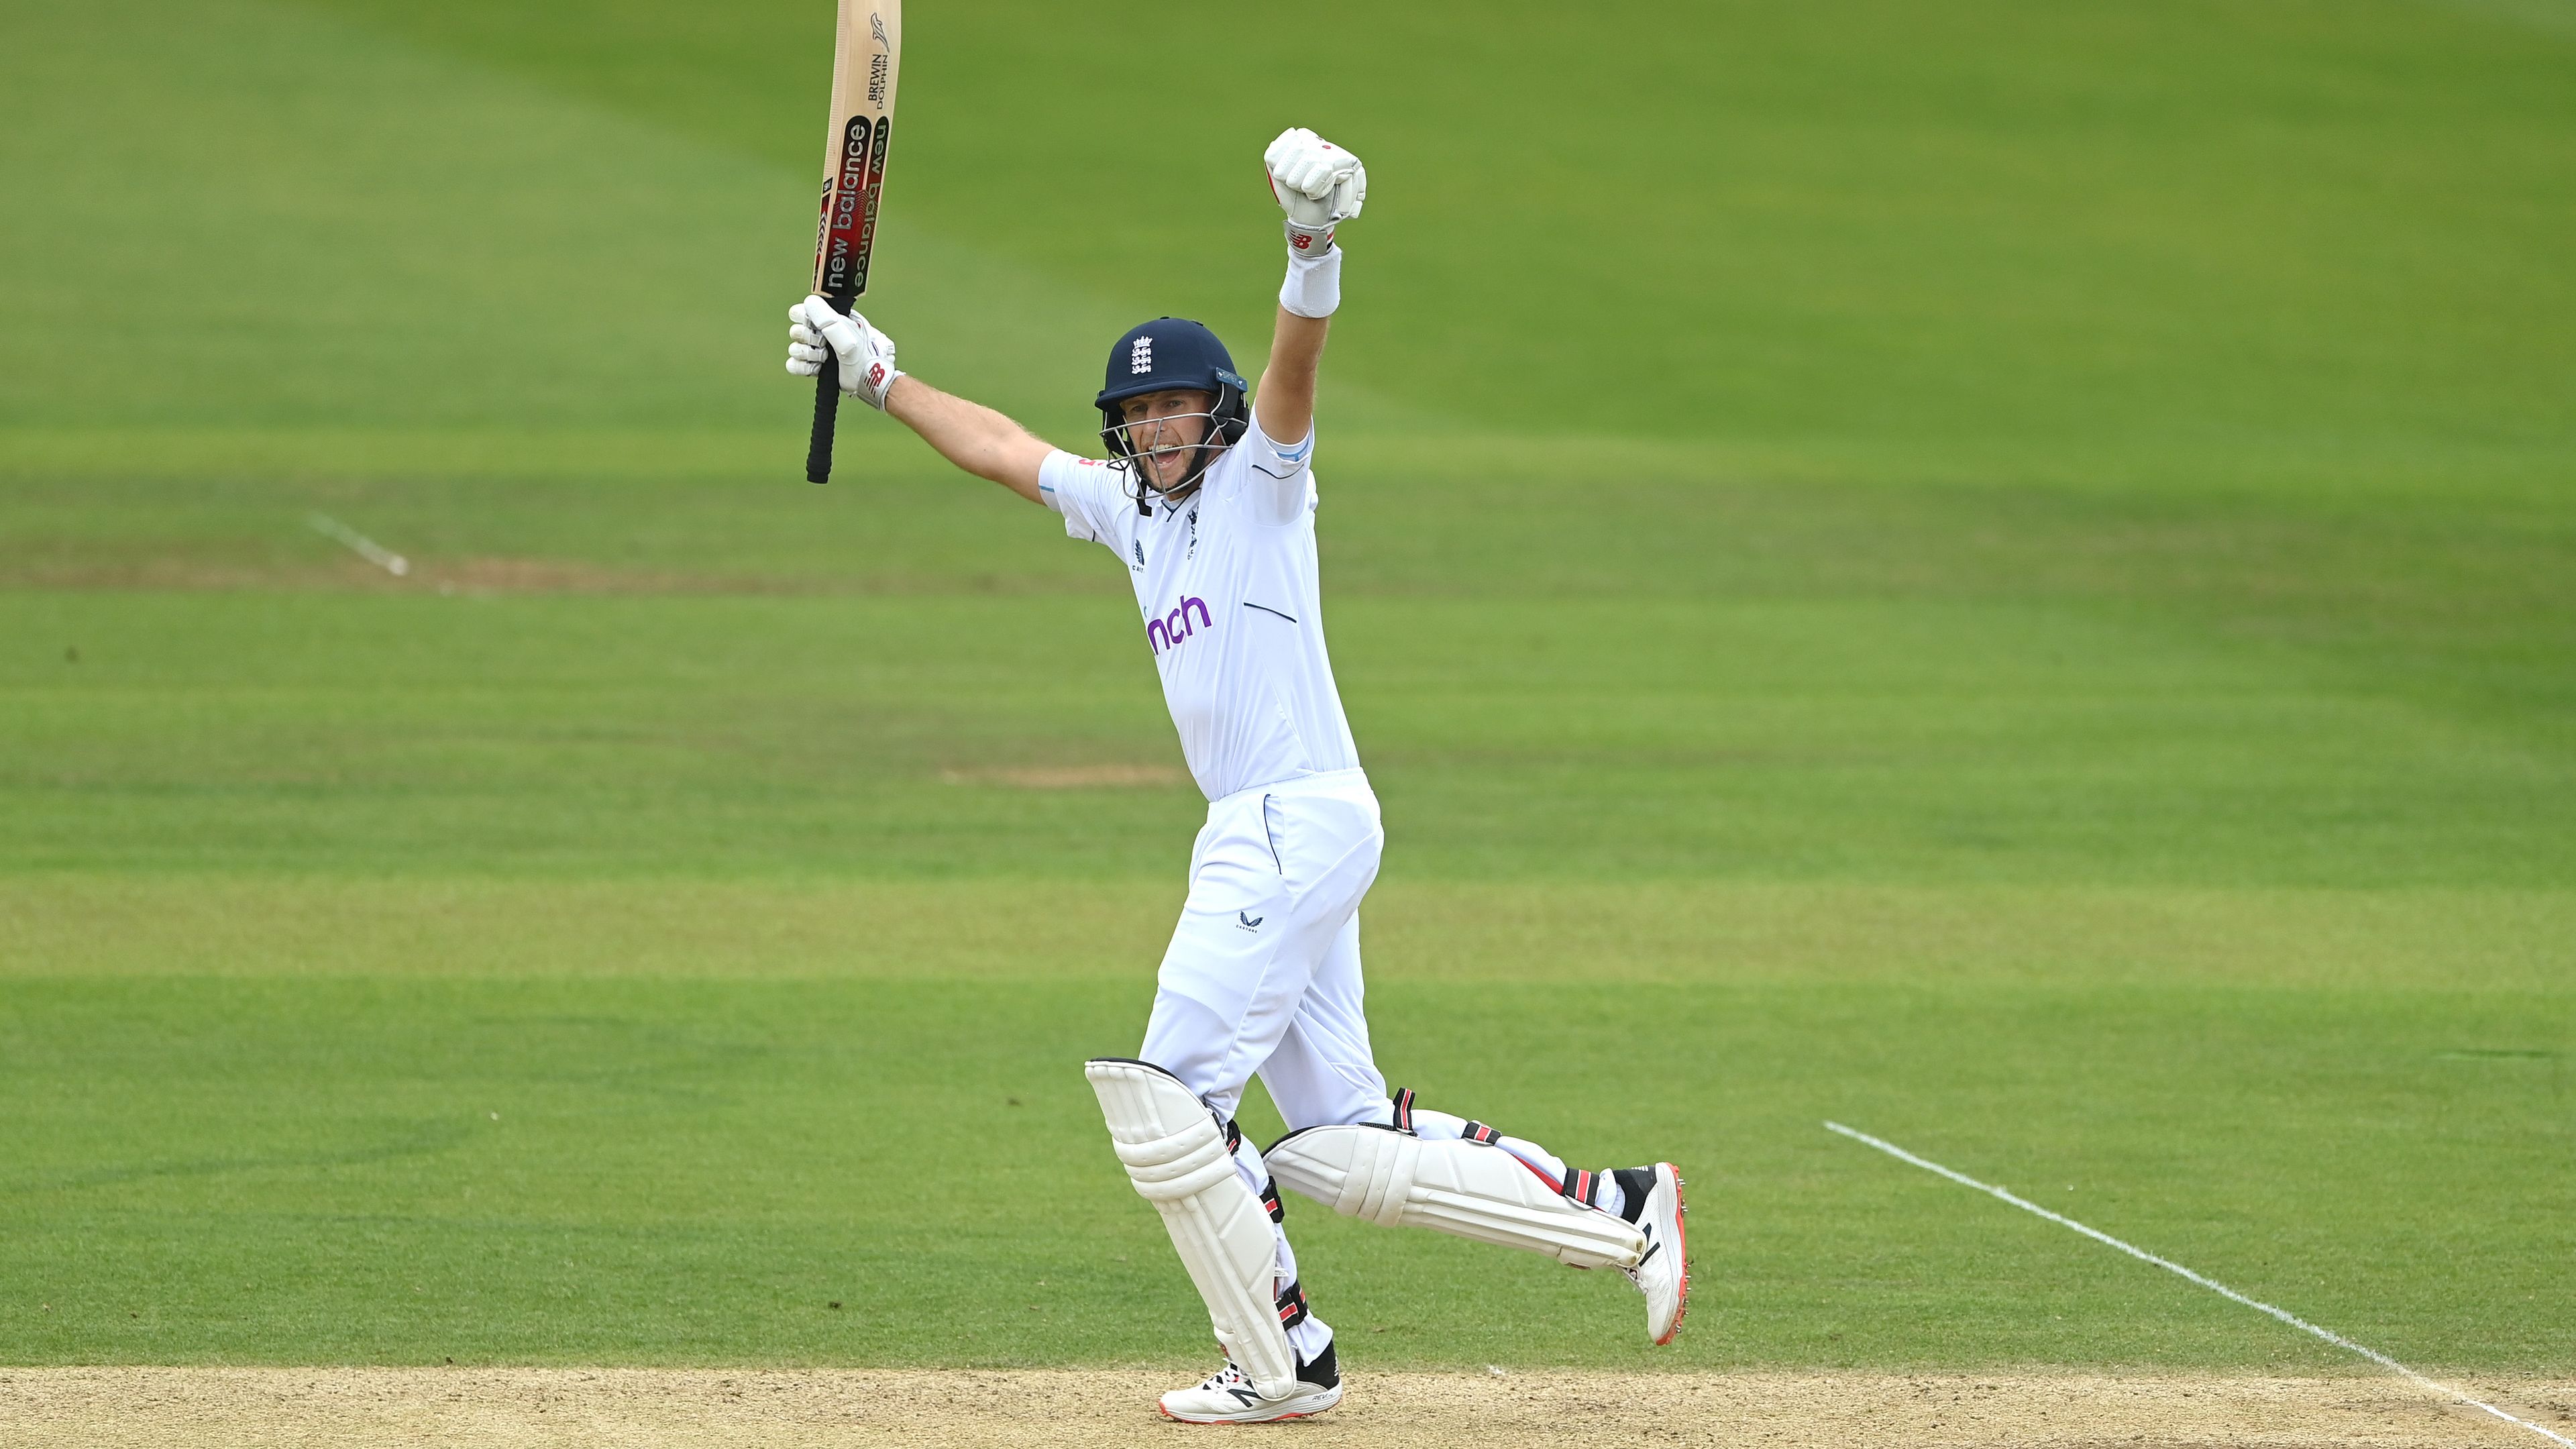 Joe Root leads England past New Zealand in first Test at Lord's, becomes second Englishman to reach 10k Test runs